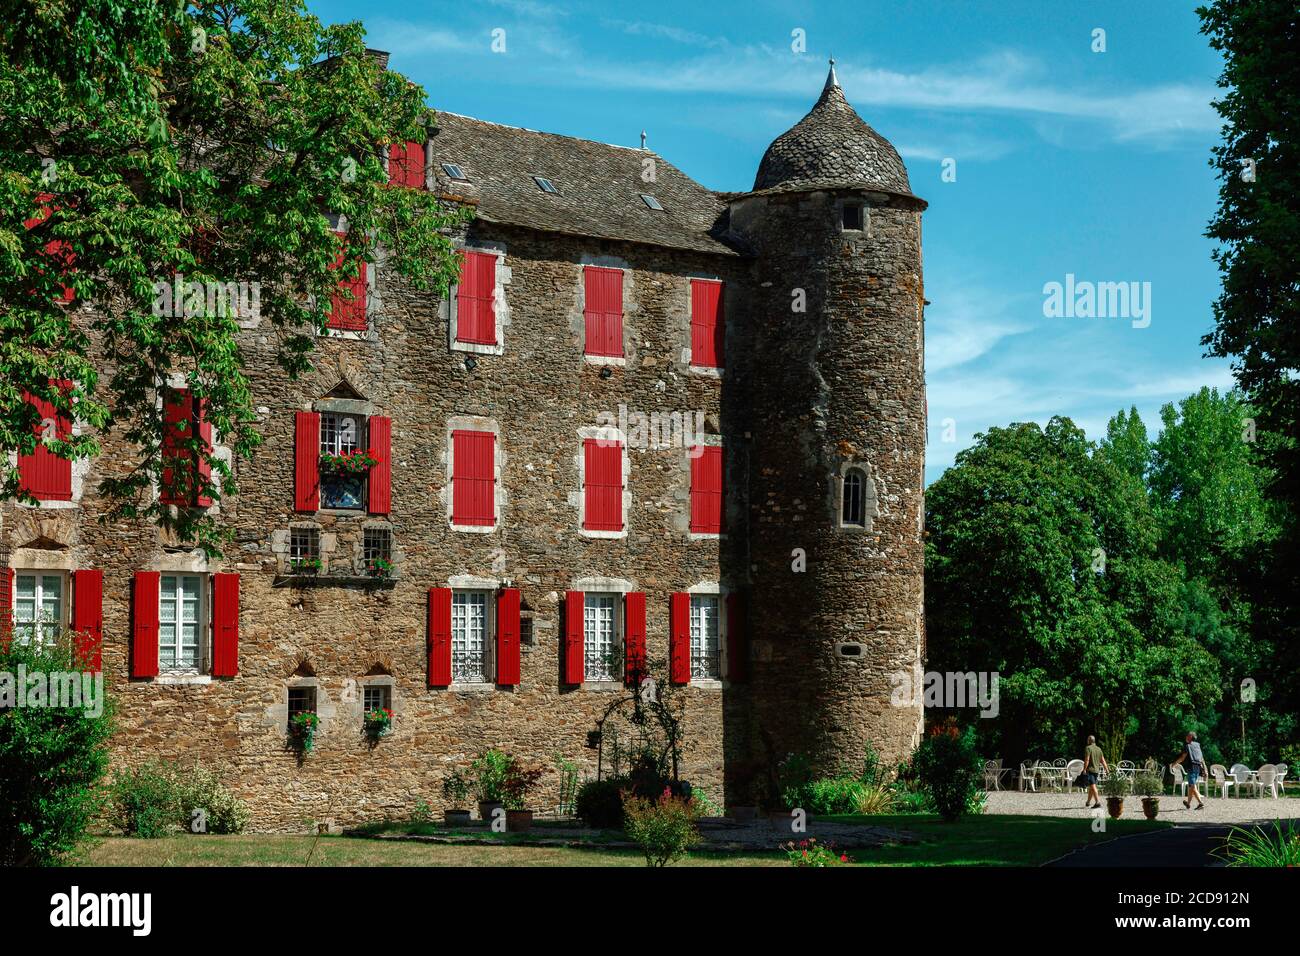 France, Aveyron, Camjac, Bosc Castle, exterior view of the castle and its gardens Stock Photo